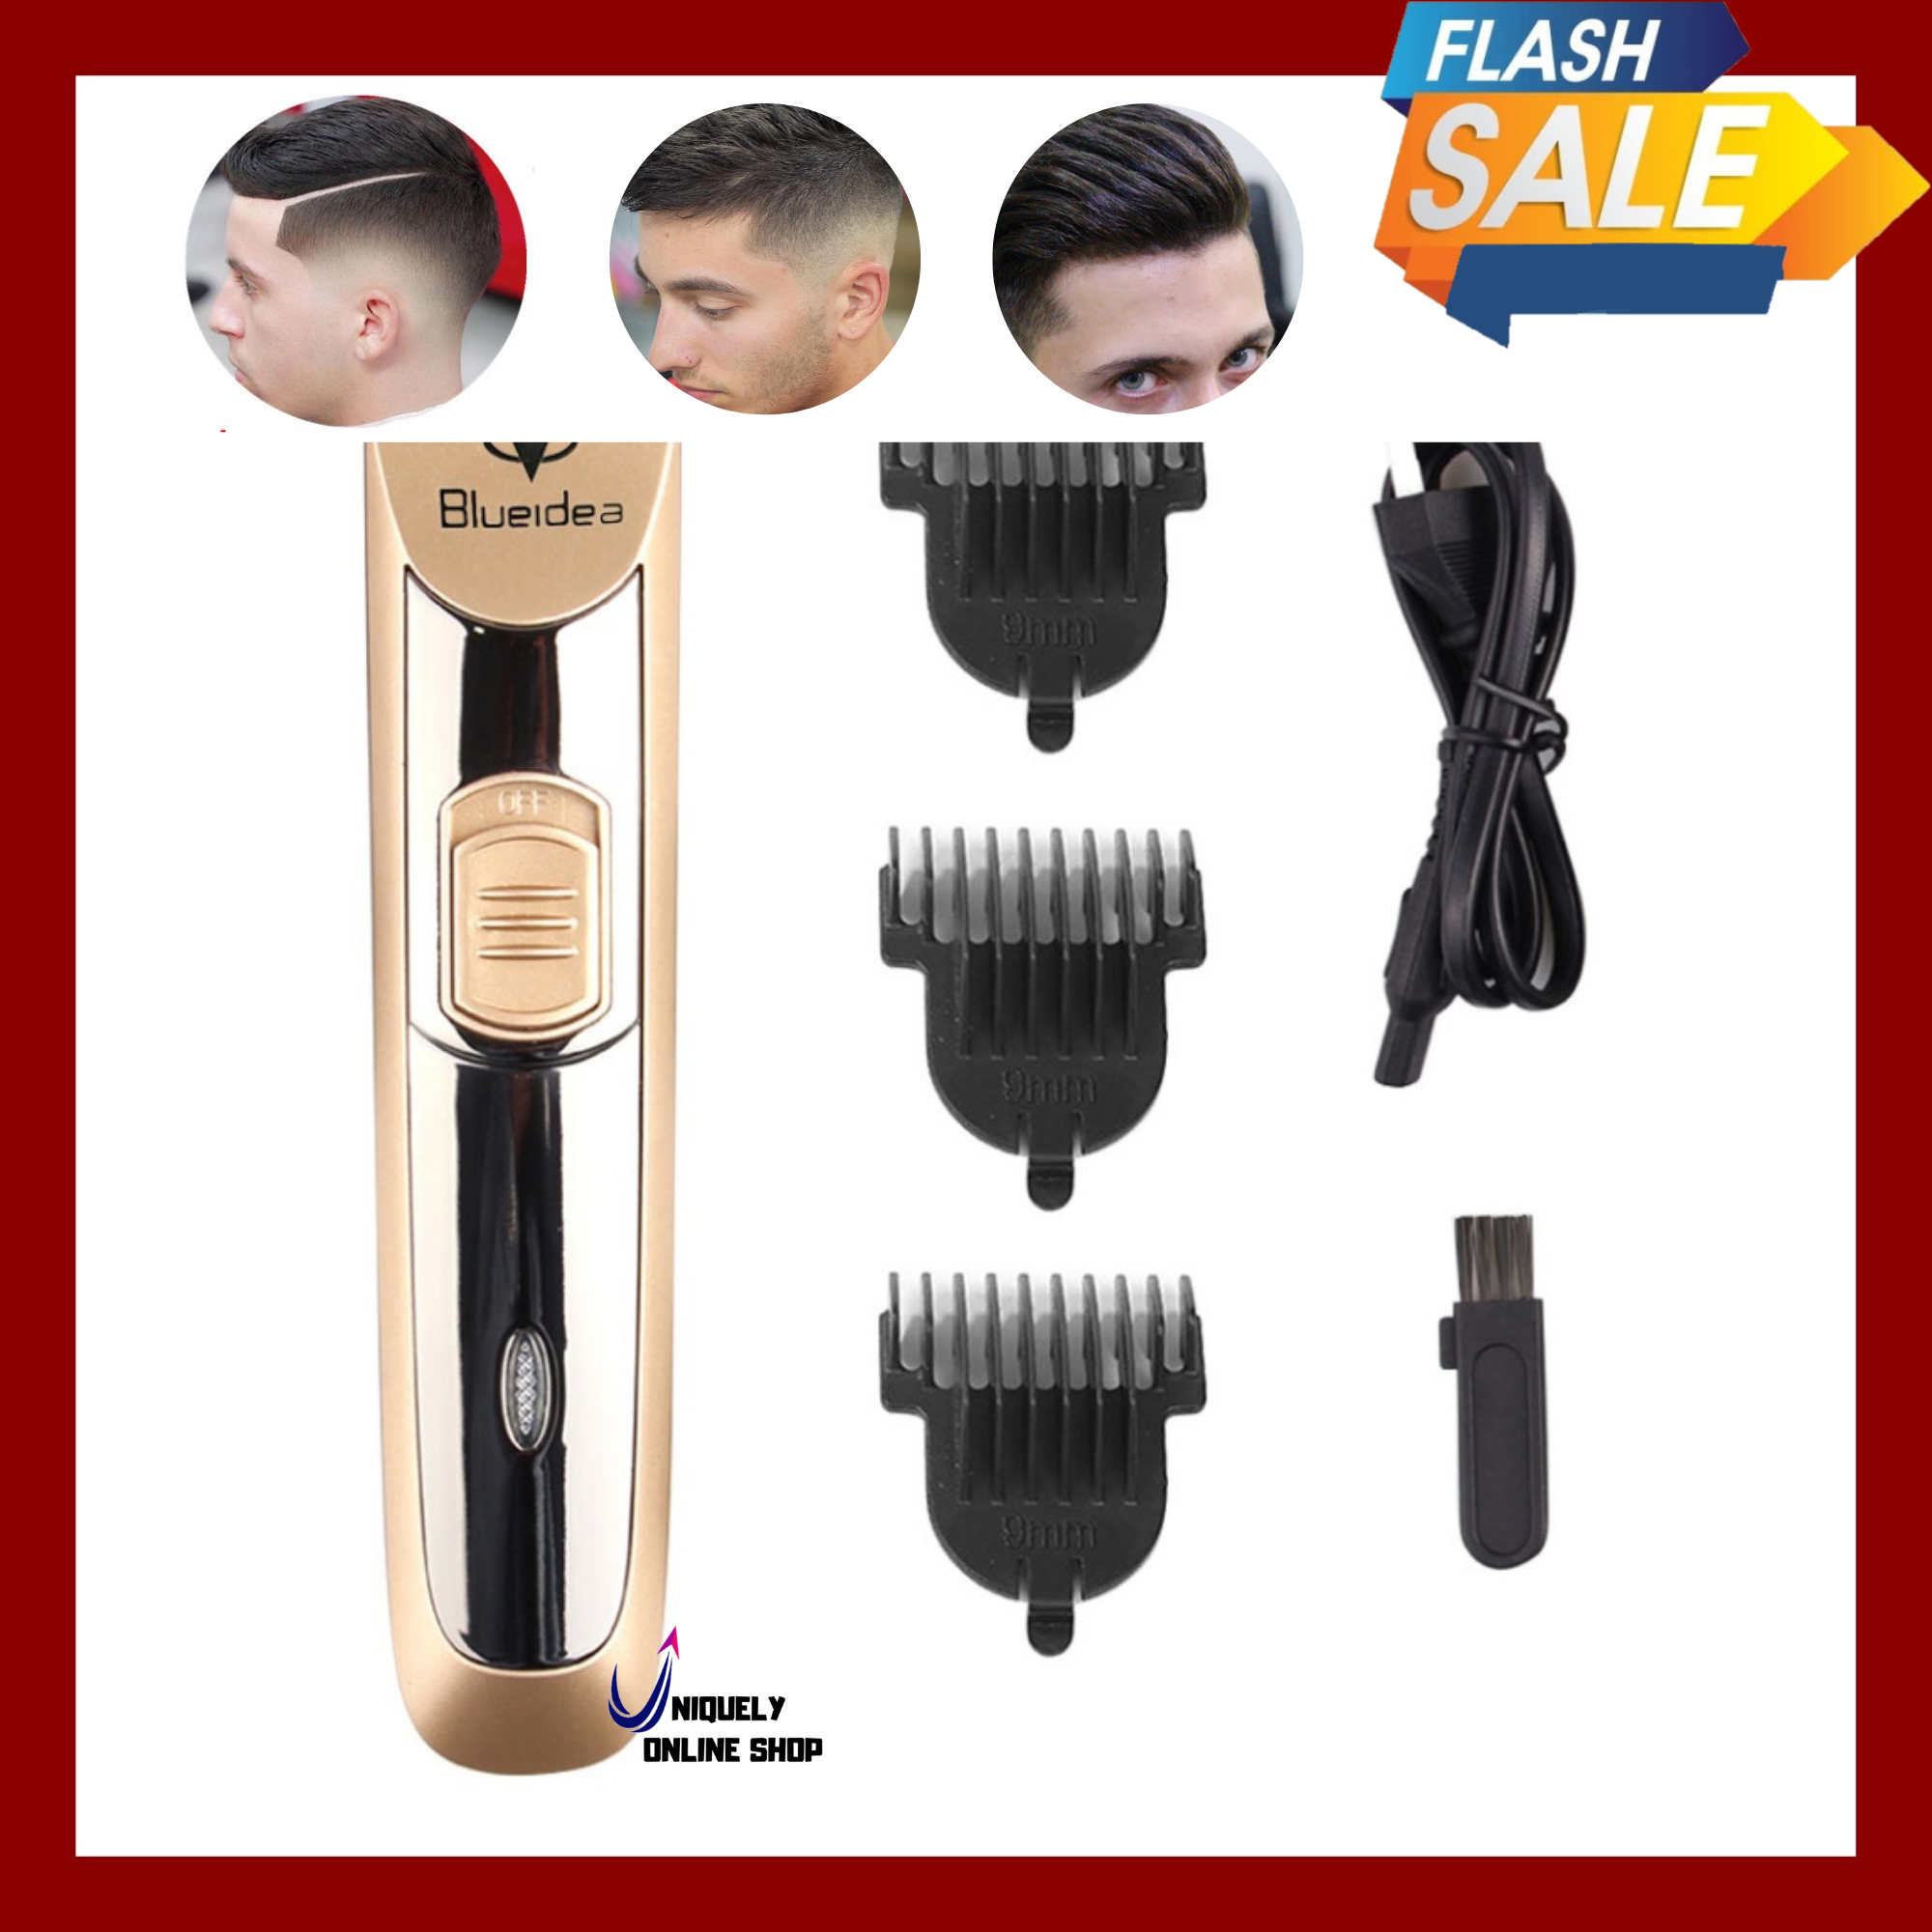 shaver for cutting hair